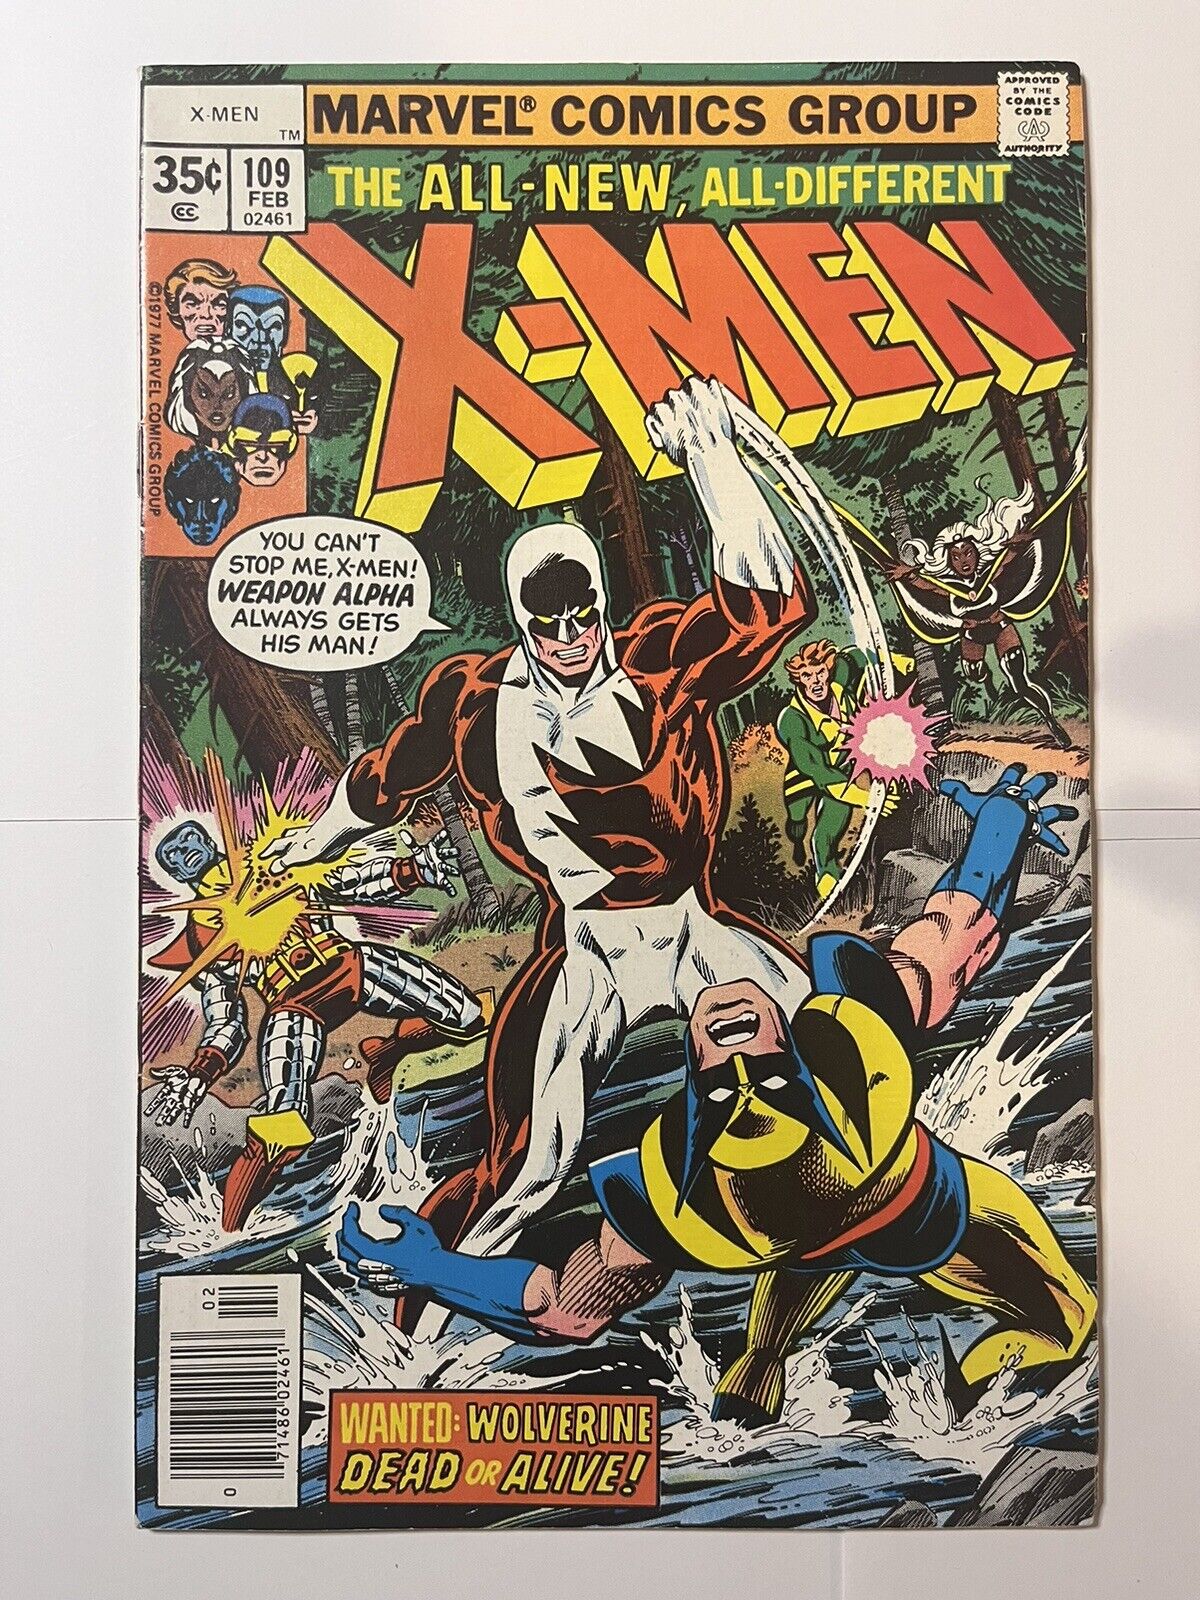 1977 Marvel Comics The All-New All-Different X-Men #109 VF 1st App Weapon Alpha